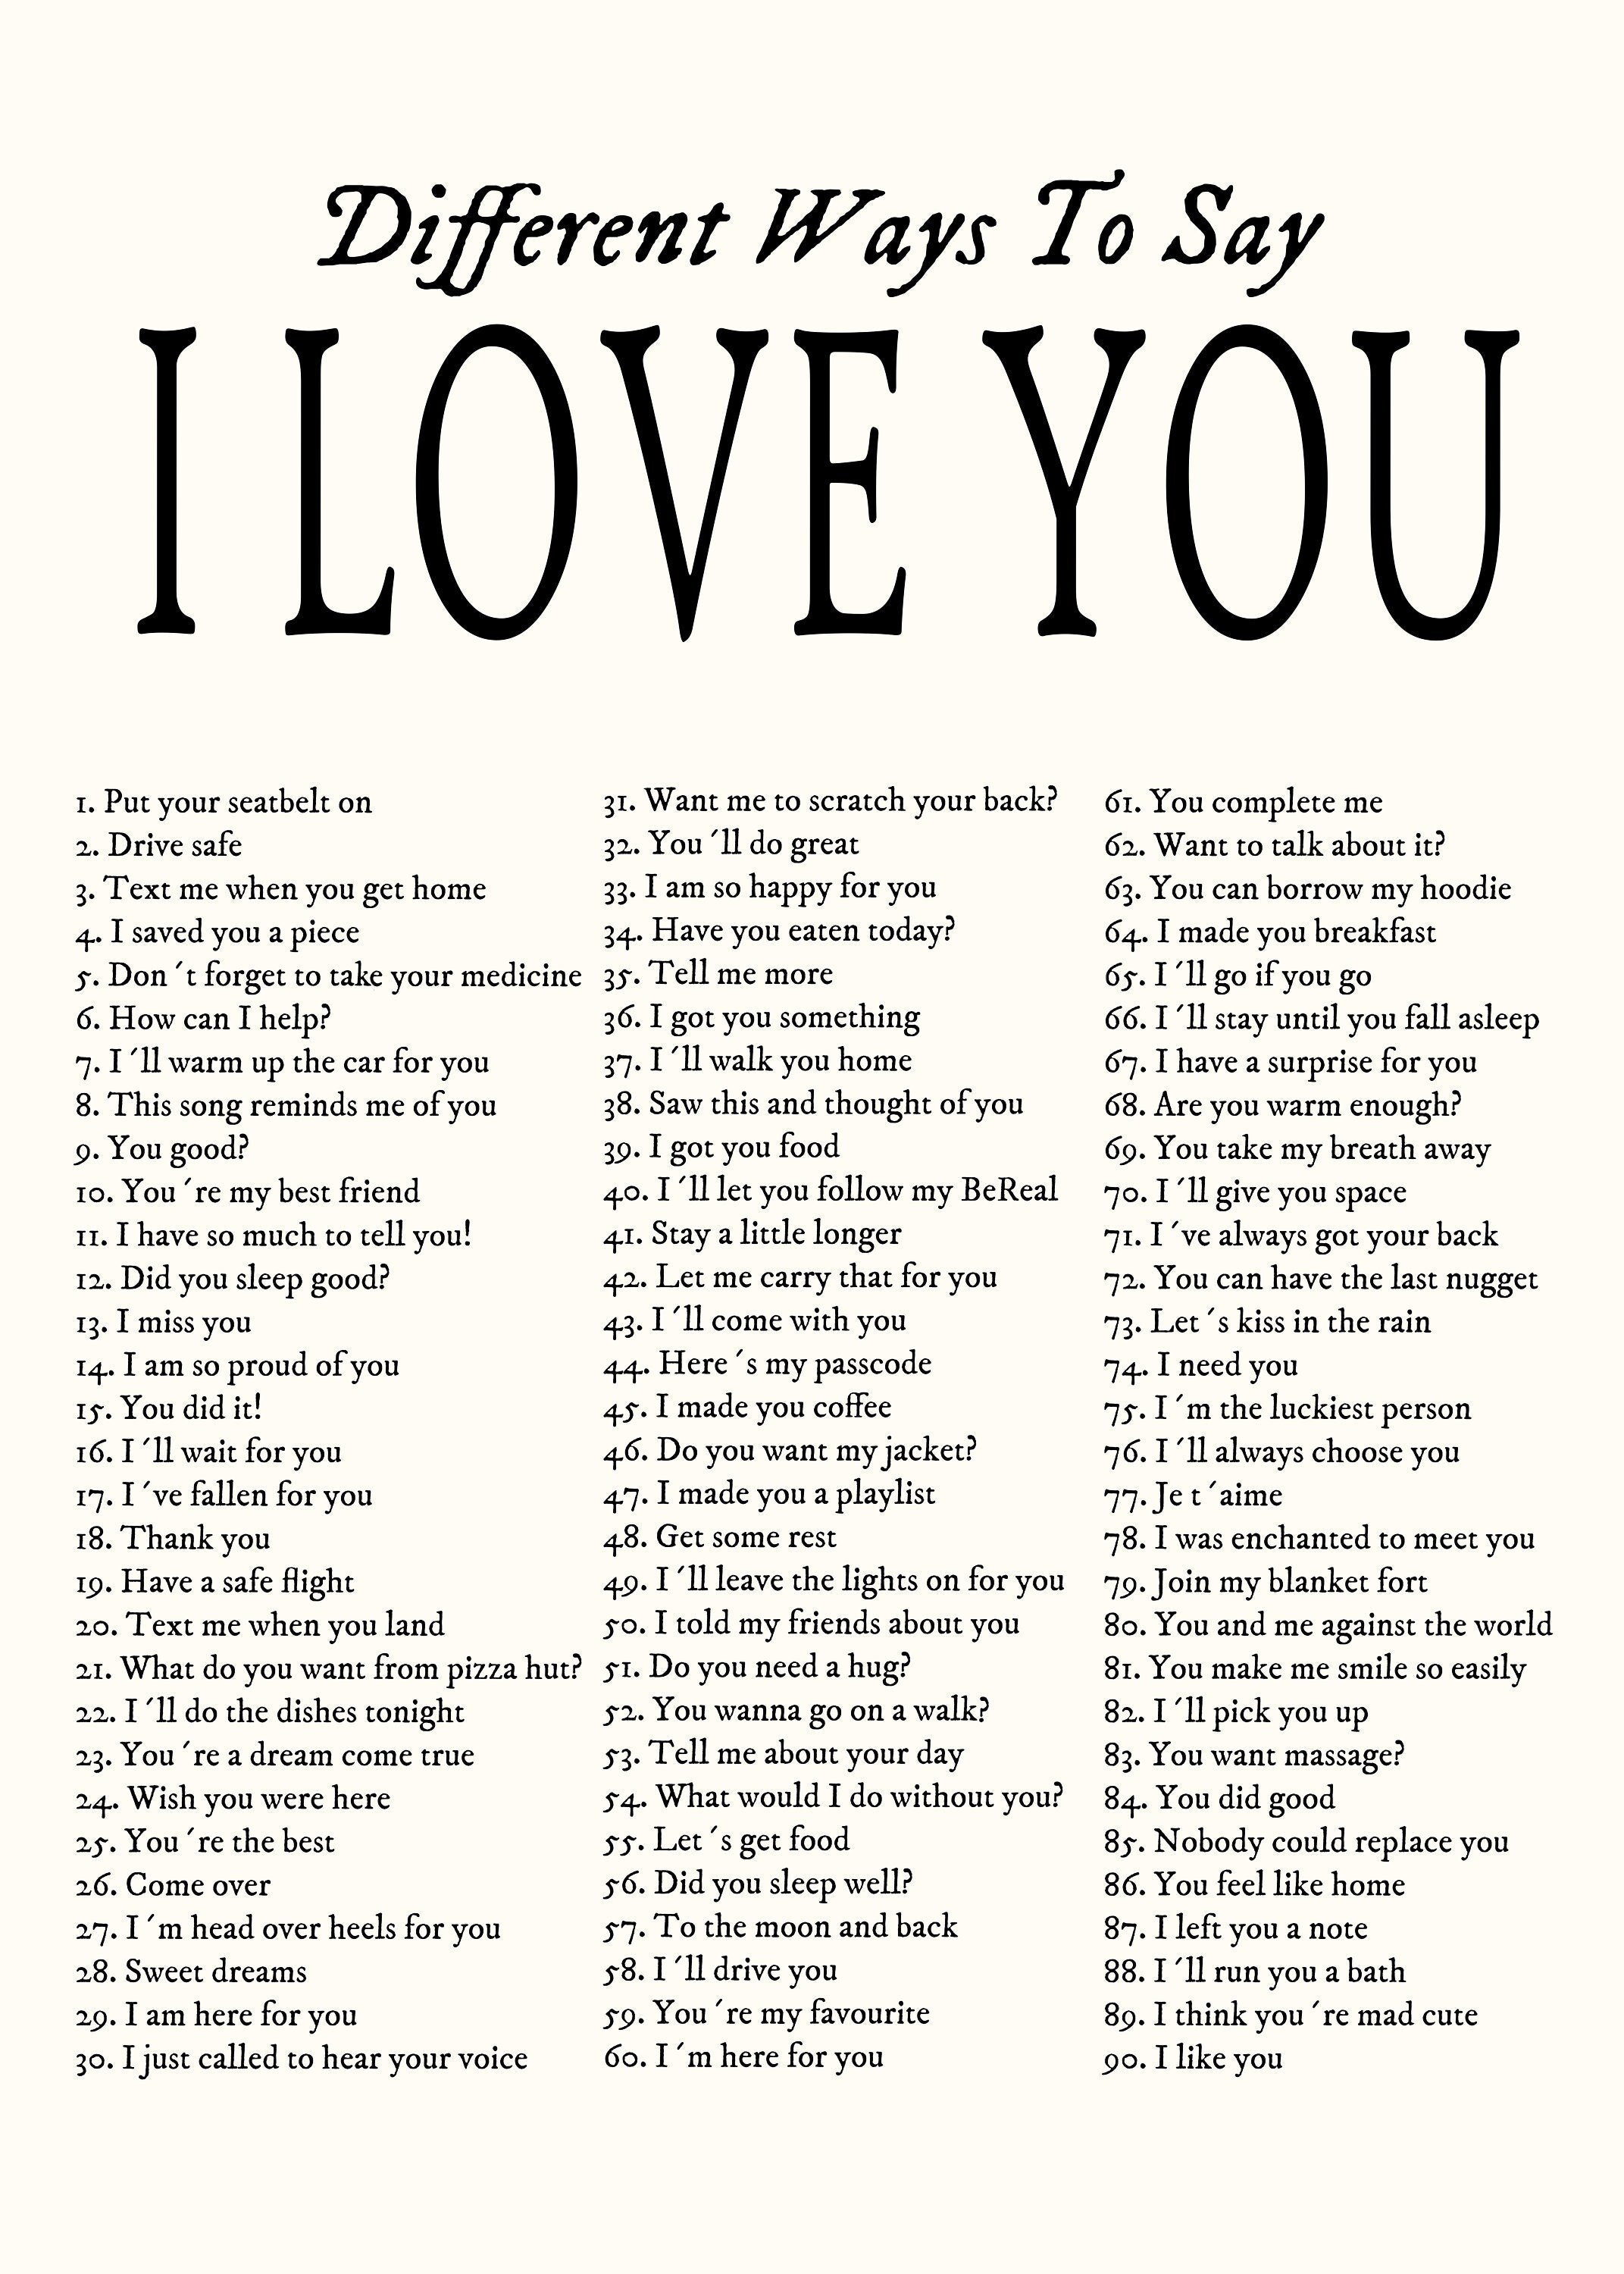 Different Ways to Say I LOVE YOU Poster Black/white - Etsy